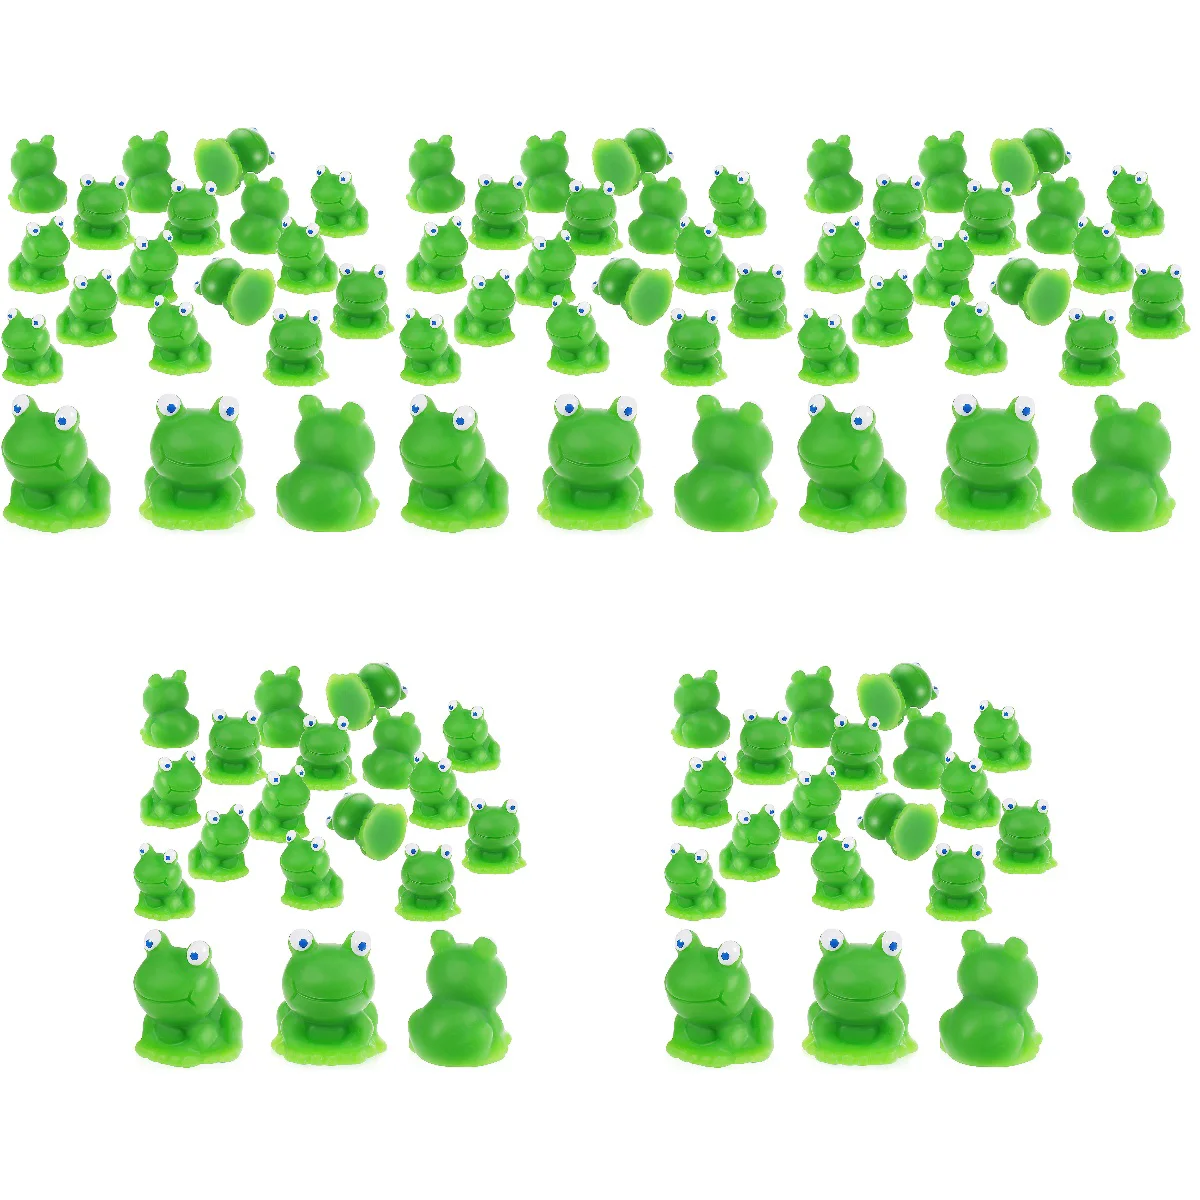 100 Pcs Little Frog Resin Crafts Miniature Landscape Statues Ornaments Artificial Frogs Figurines Small Model